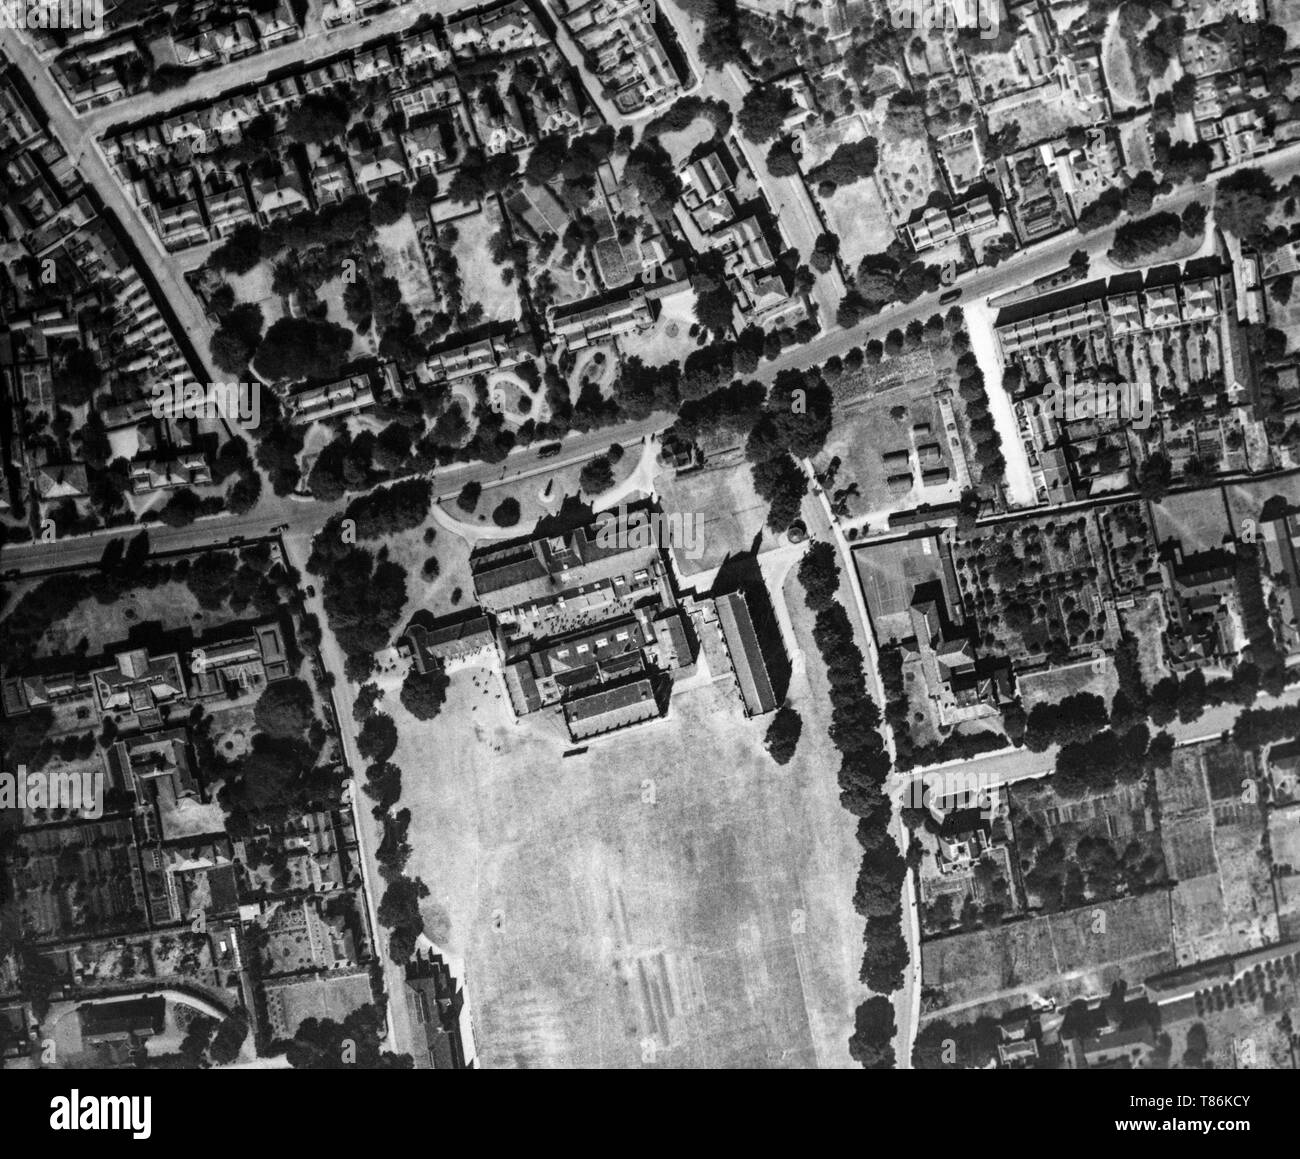 A black and white aerial photograph taken on 21st June 1921 showing Cheltenham College, and the surrounding area, in Gloucestershire, England. Stock Photo